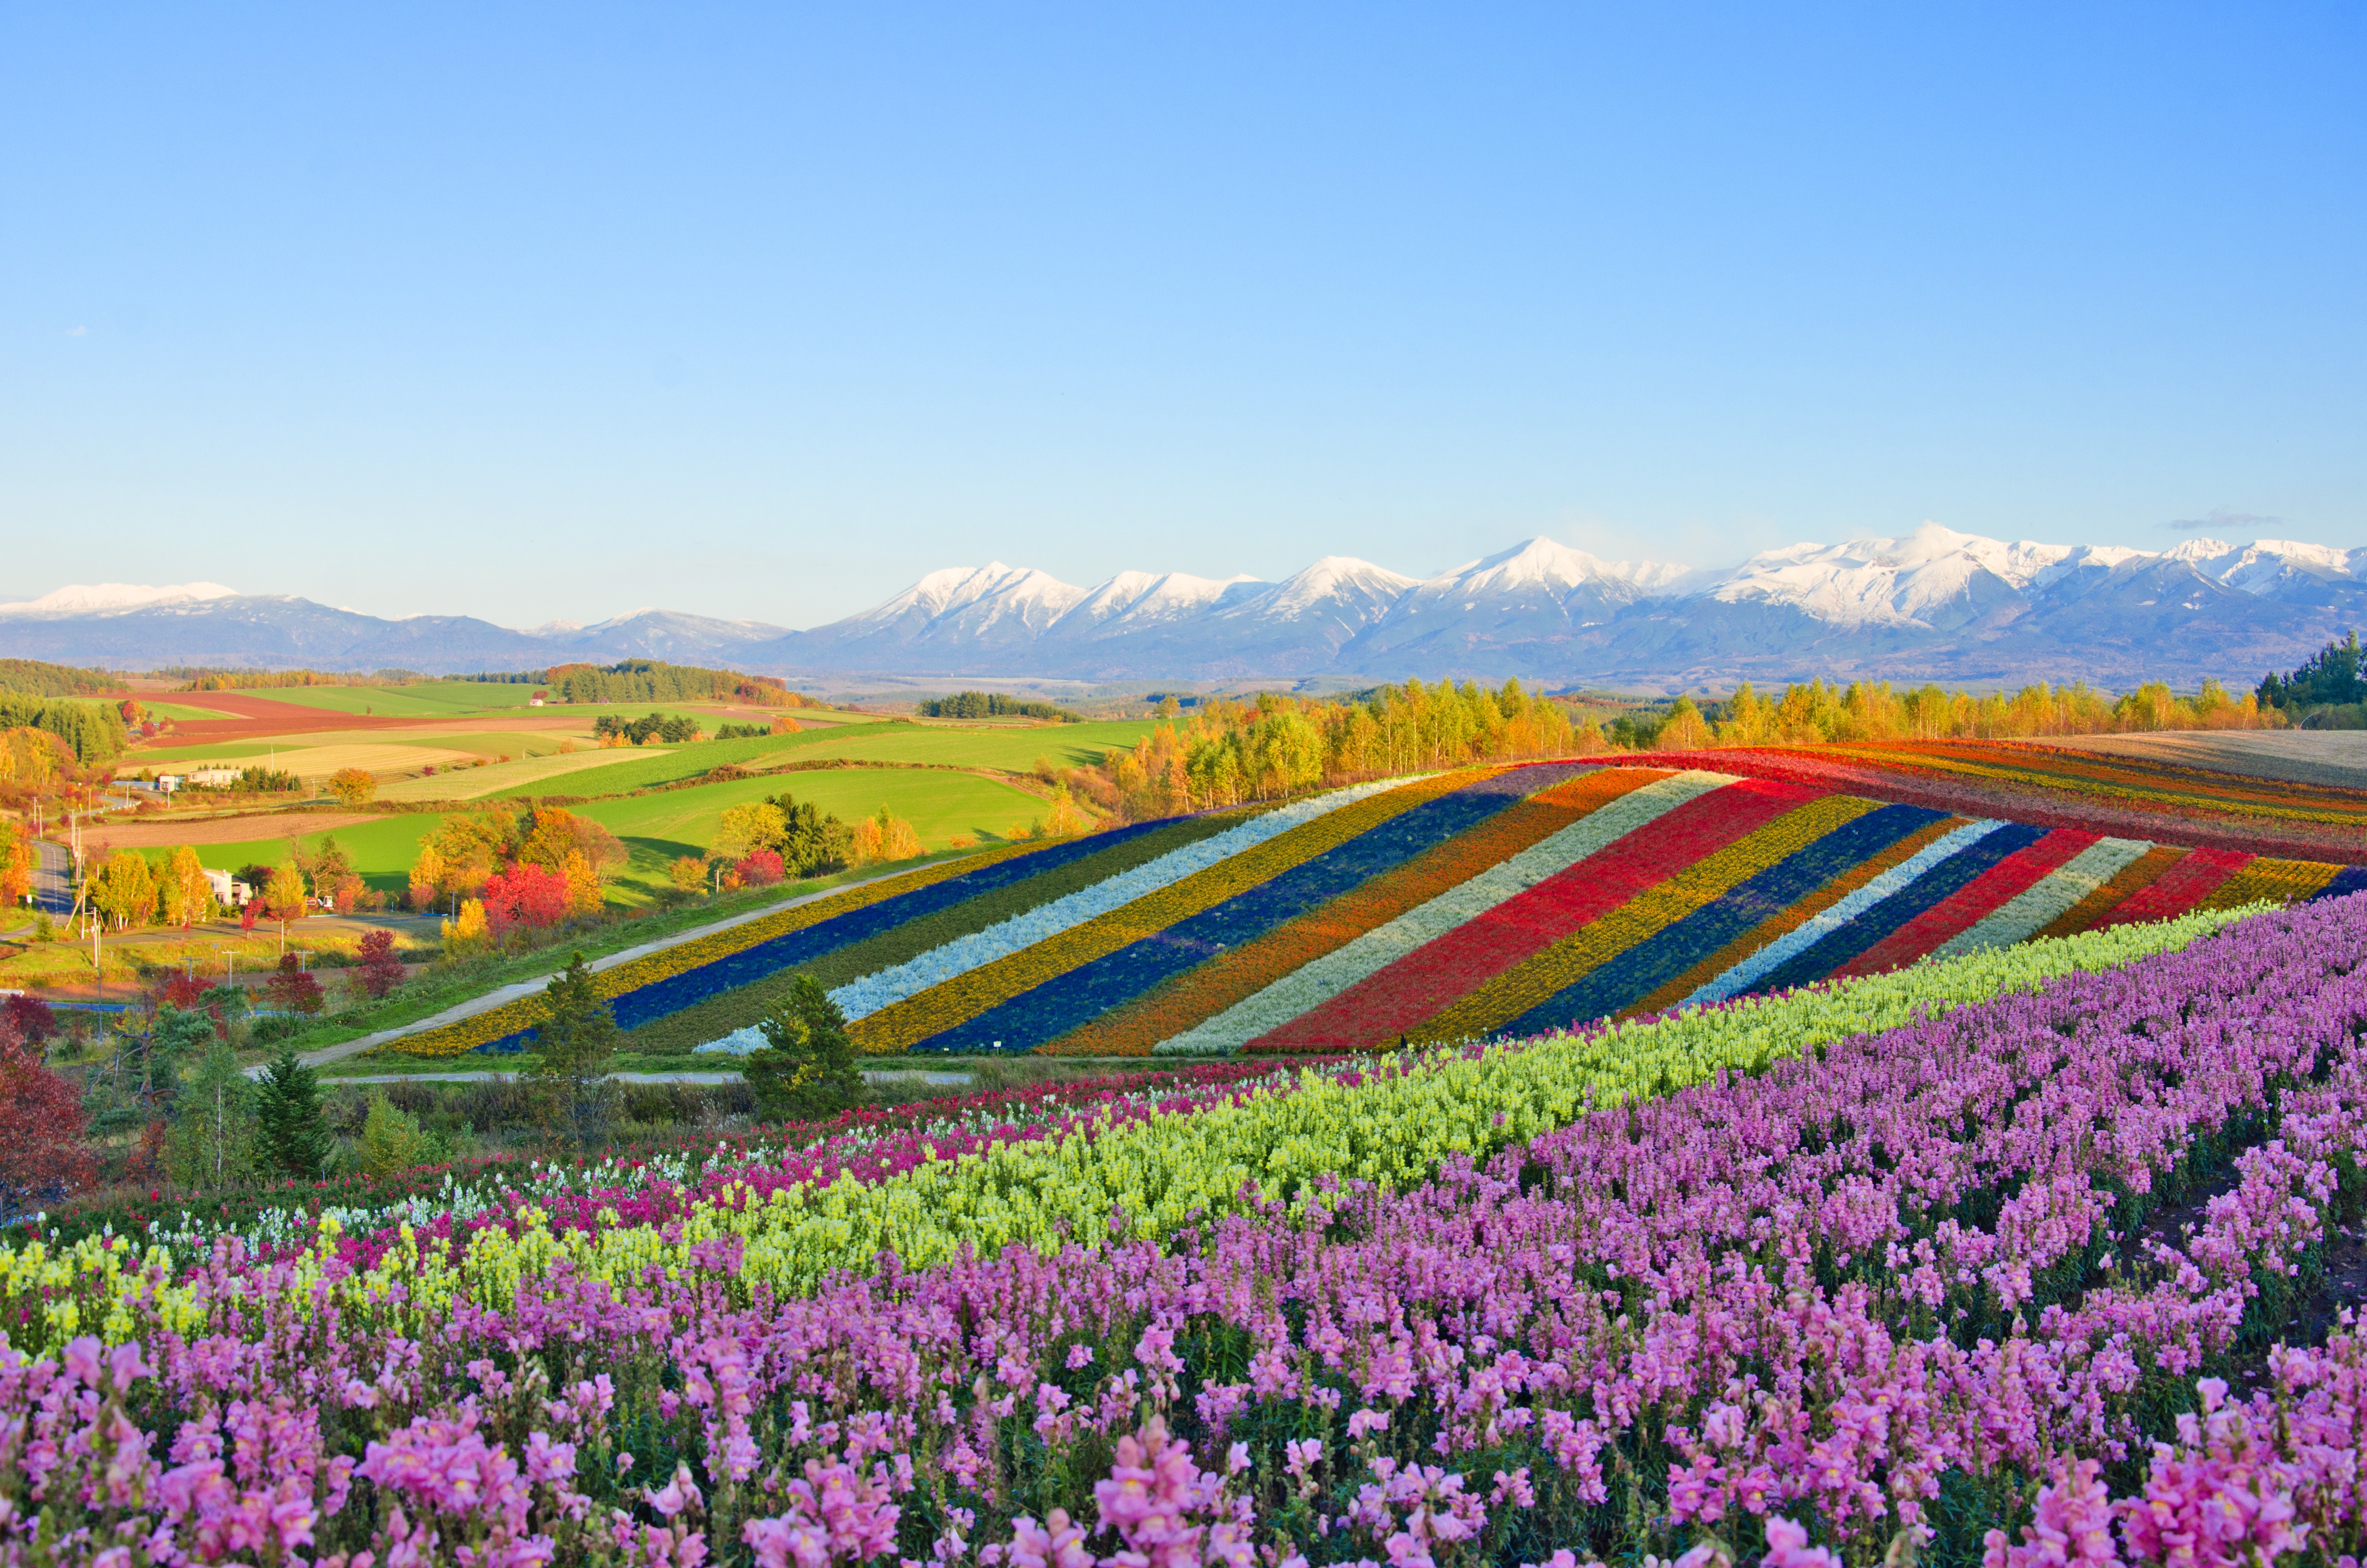 Biei offers surreal summer scenery, when fields of flowers like sunflowers and lavender bloom in a colourful patchwork.